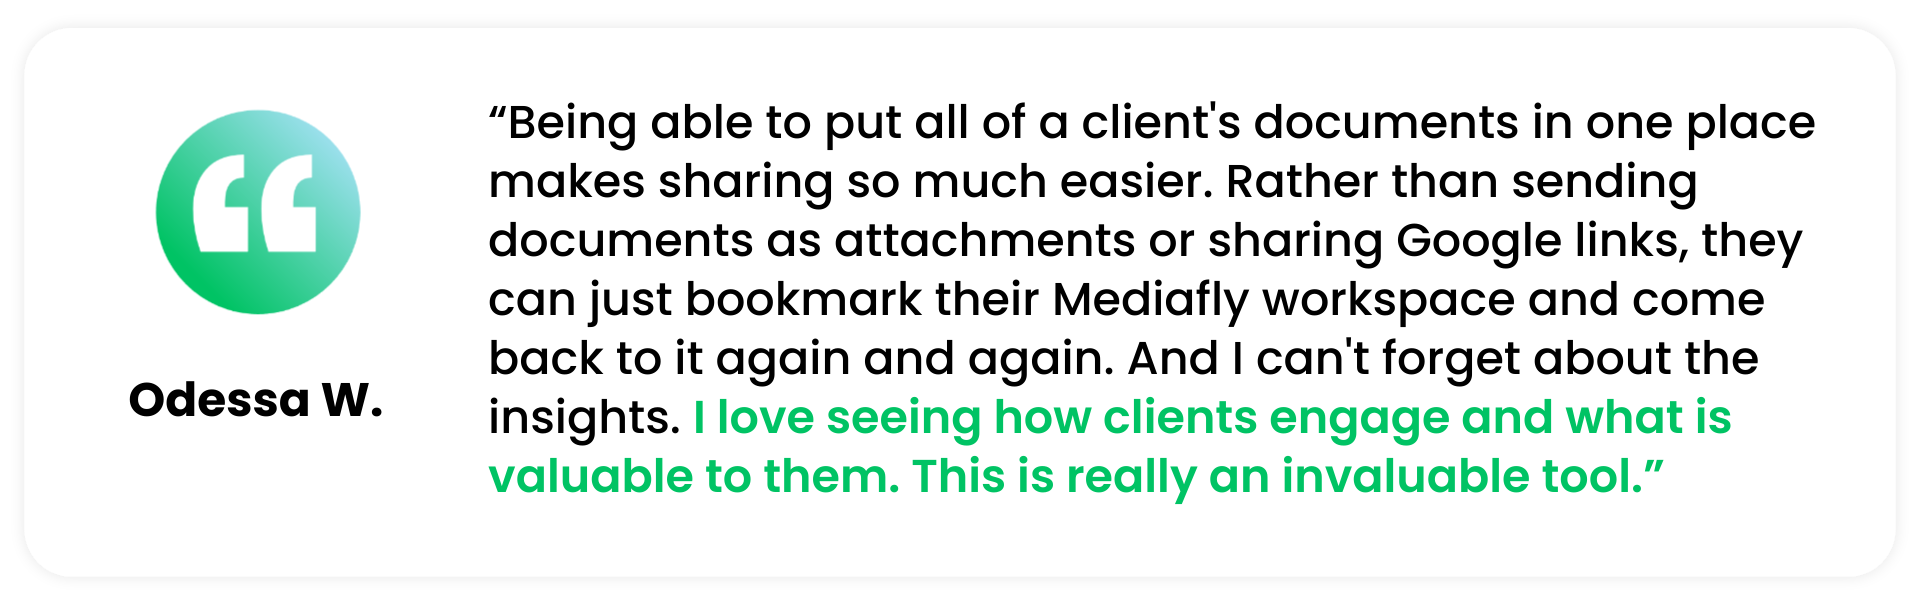 A quote from a recent Mediafly G2 Review that says "Being able to put all of a client's documents in one place makes sharing so much easier. Rather than sending documents as attachments or sharing Google links, they can just bookmark their Mediafly workspace and come back to it again and again. And I can't forget the insights. I love seeing how clients engage and what is valuable to them. This really is an invaluable tool." - Odessa W.